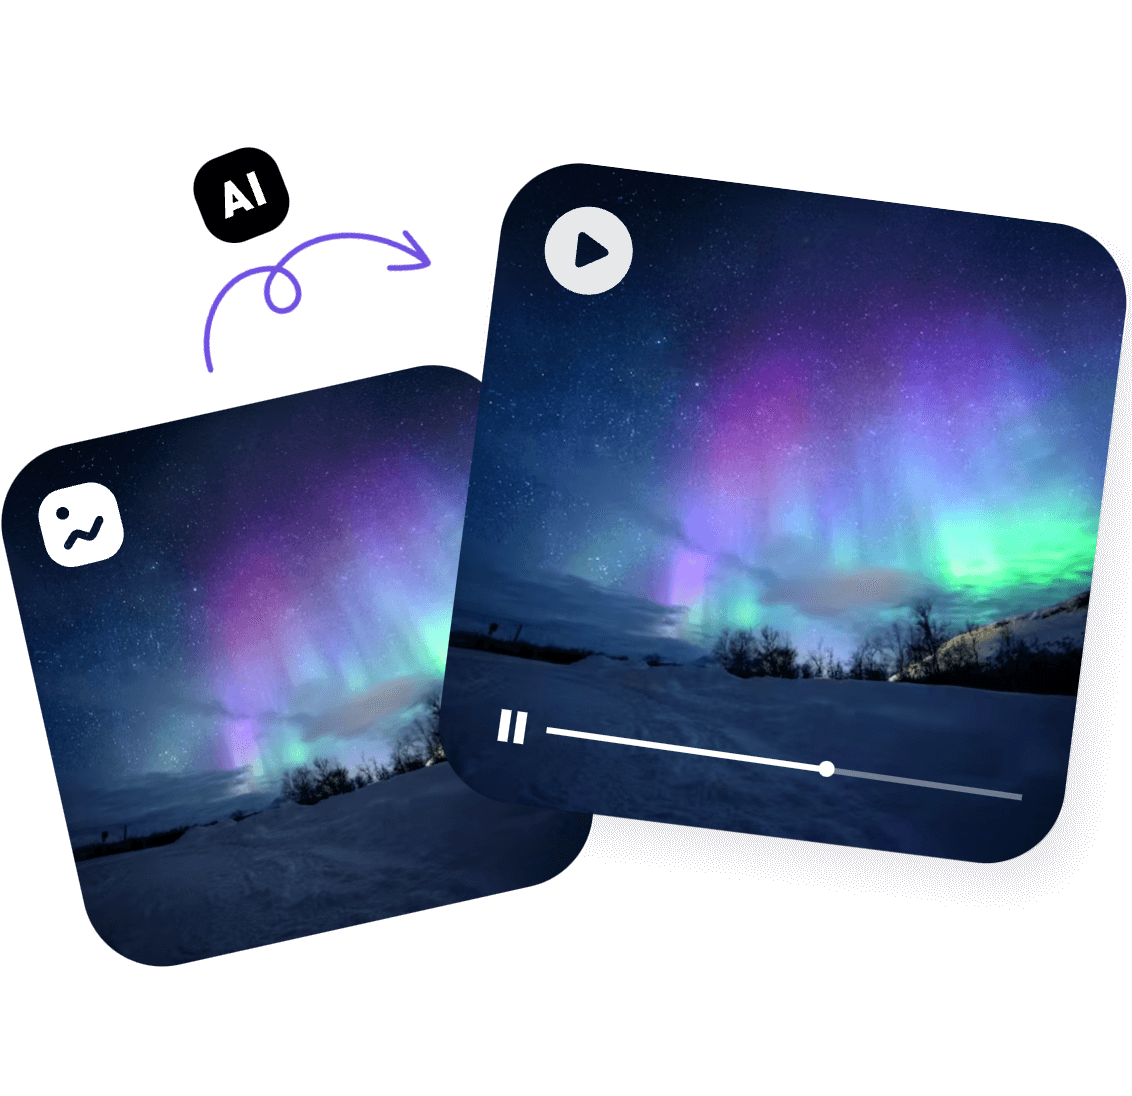 convert a still aurora image to a dynamic video with AI photo animator